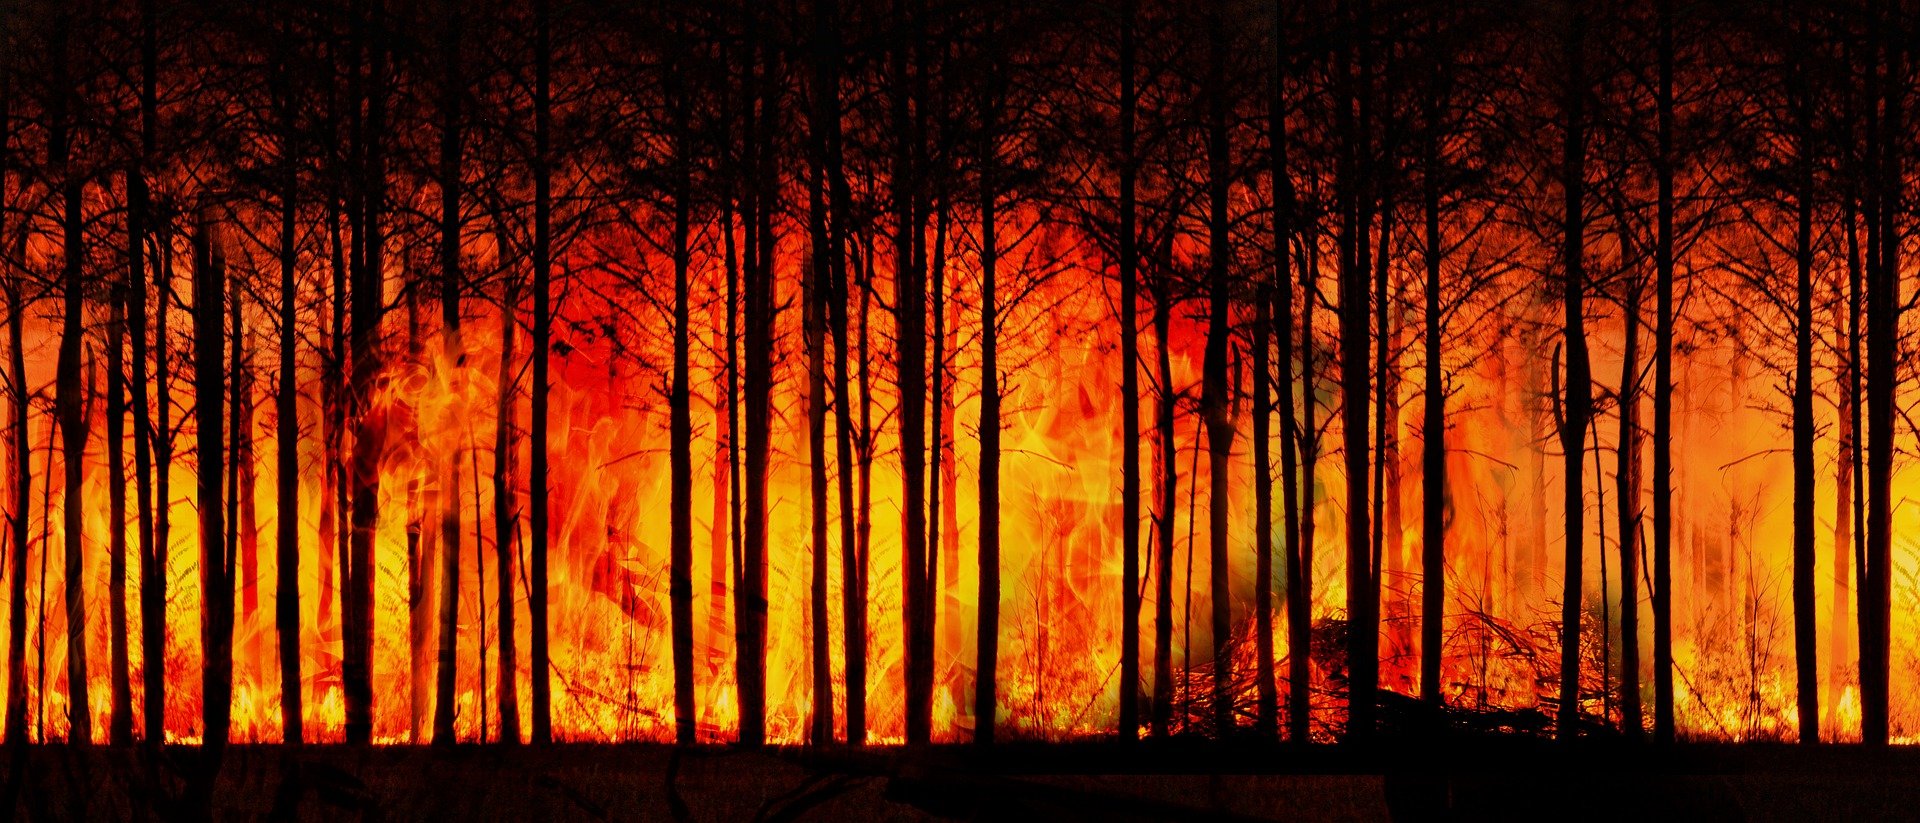 California college professor busted for arson spree contributing to the “Dixie Fire”